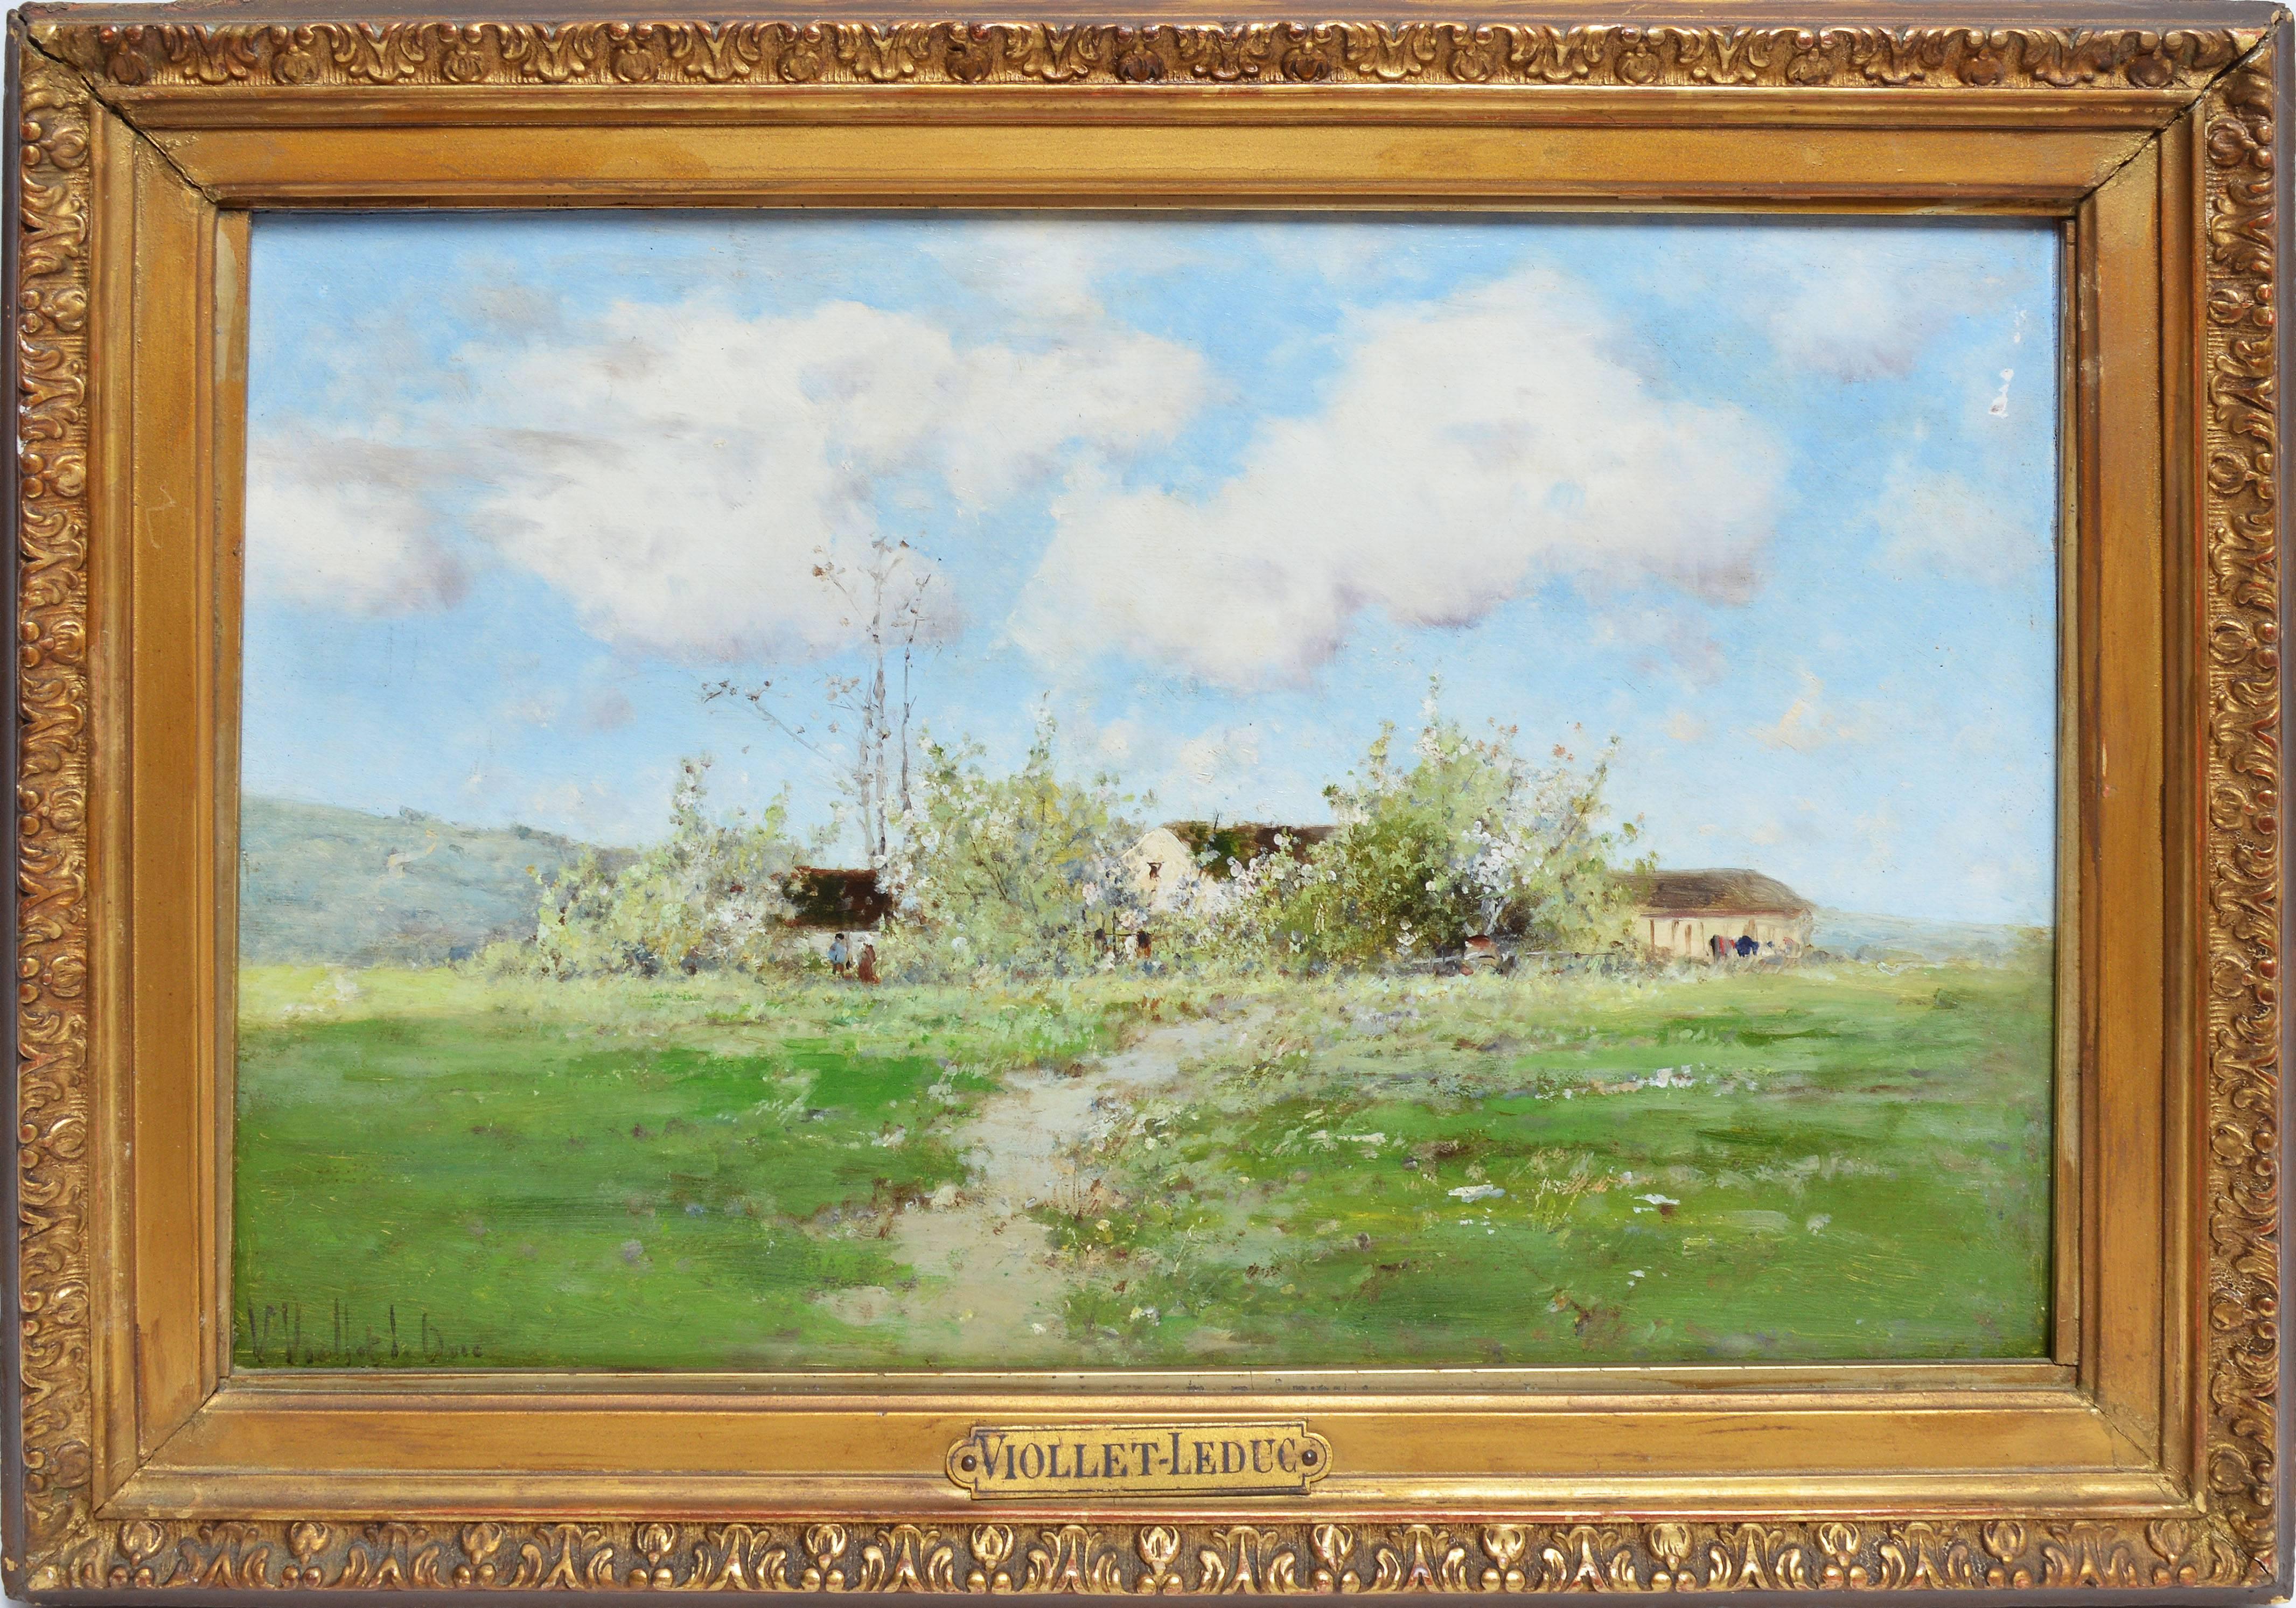 Antique Barbizon school landscape by Victor Viollet-le-Duc (1848-1901).  Oil on board, circa 1875.  Signed lower left, &quot;V. Viollet-le-Duc&quot;.  Displayed in a period giltwood frame.  Image size, 12&quot;L x 8.5&quot;H, overall 15&quot;L x